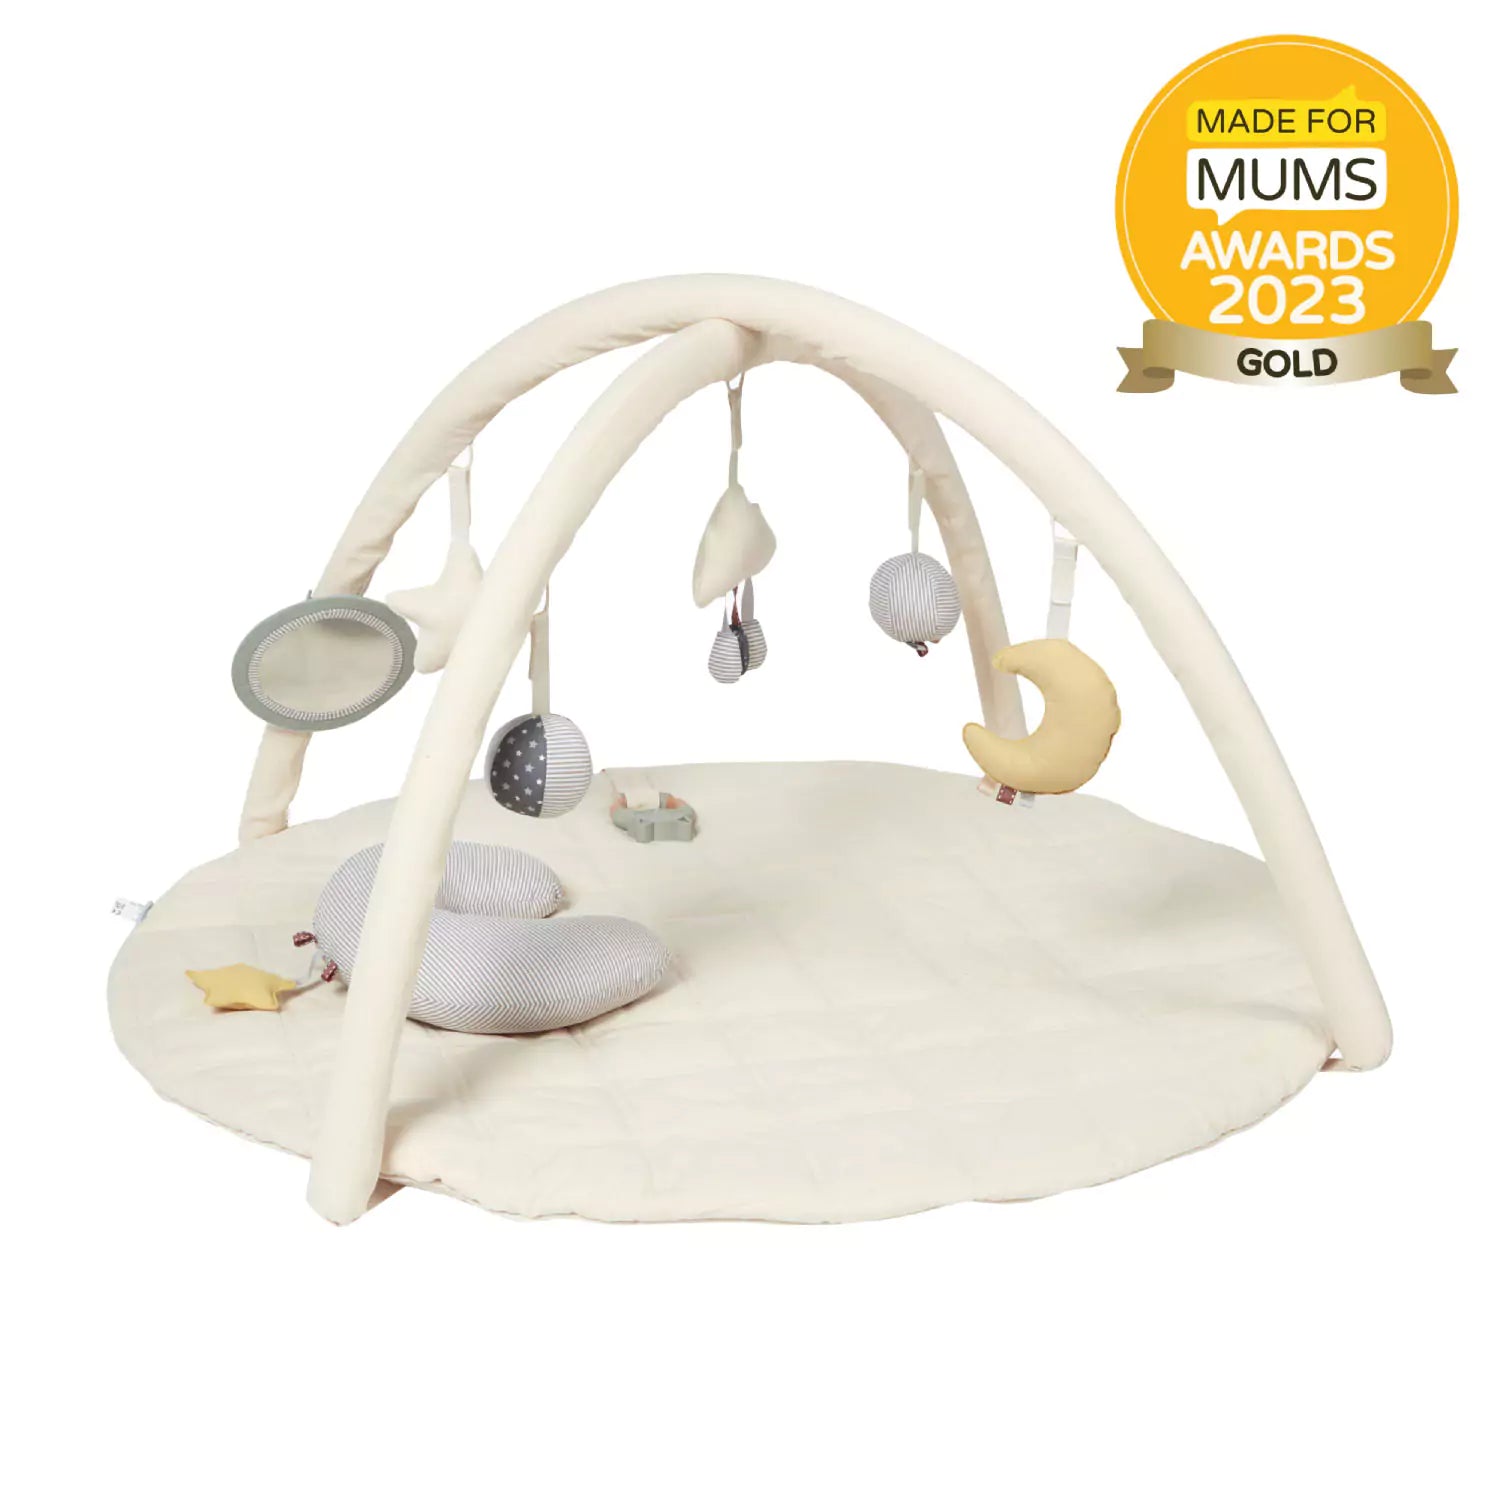 Award-Winning 5-in-1 Organic Baby Play Mat with Toys